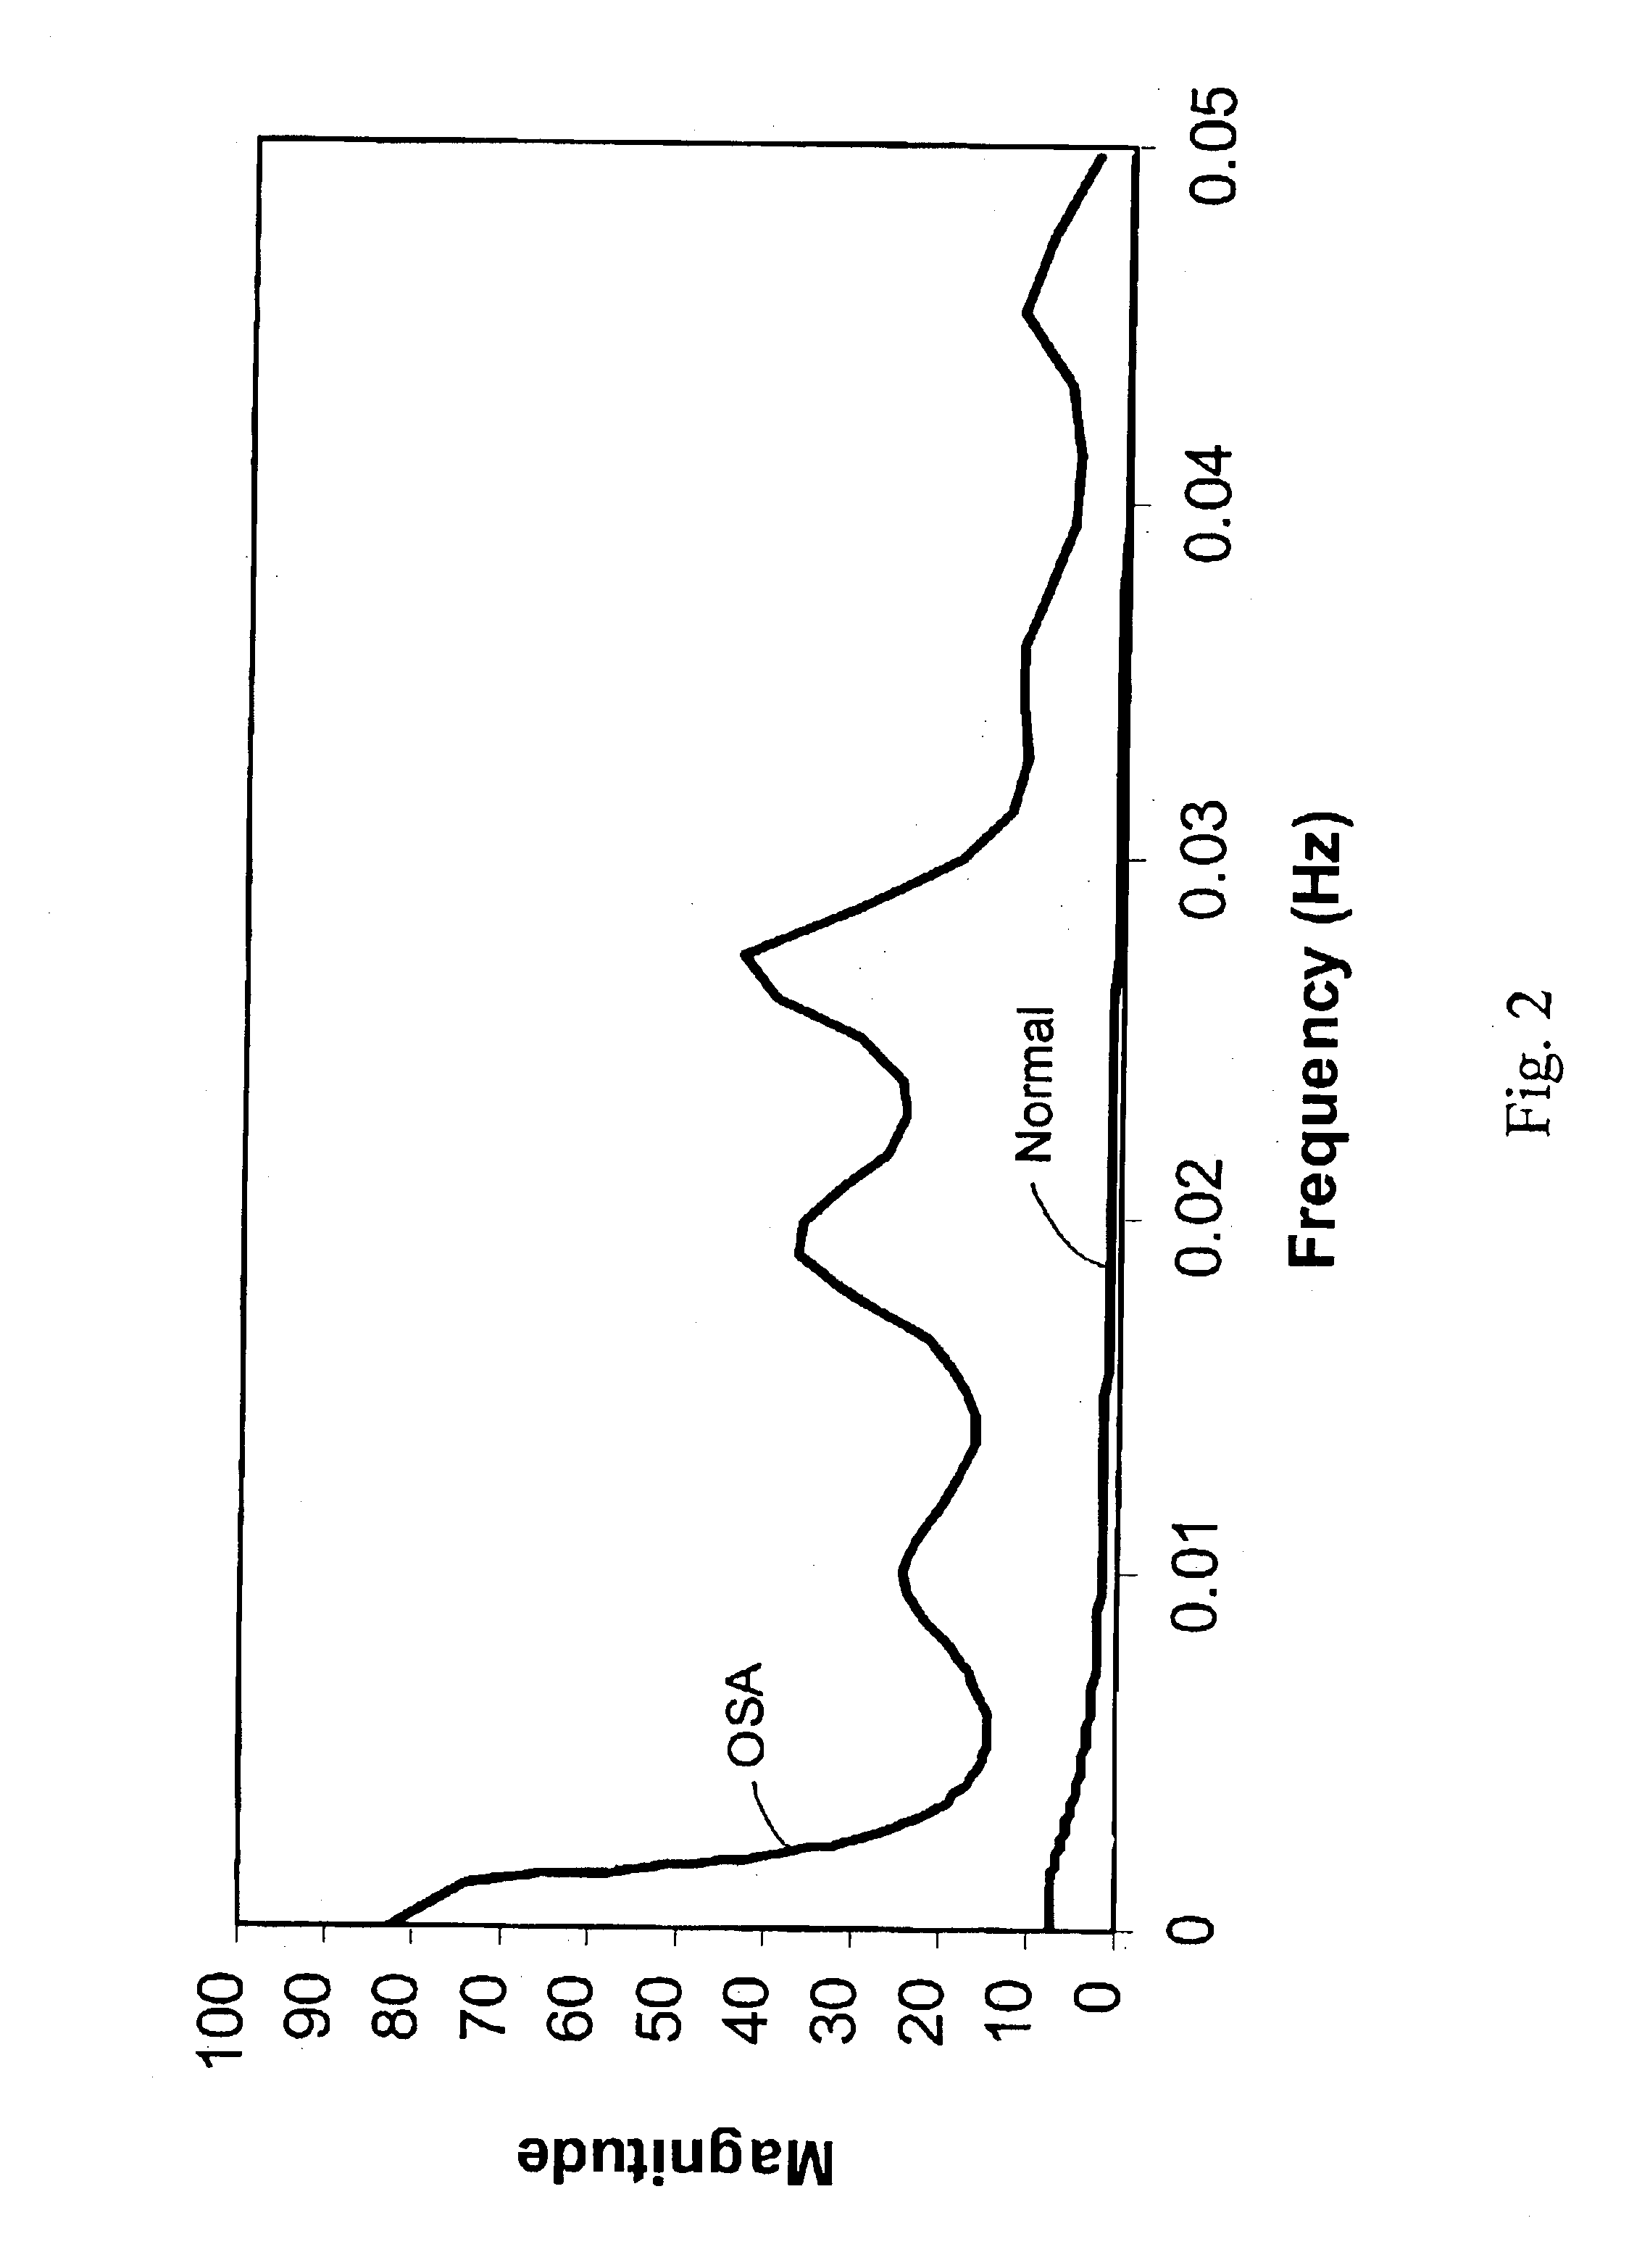 Method for detecting Cheyne-Stokes respiration in patients with congestive heart failure